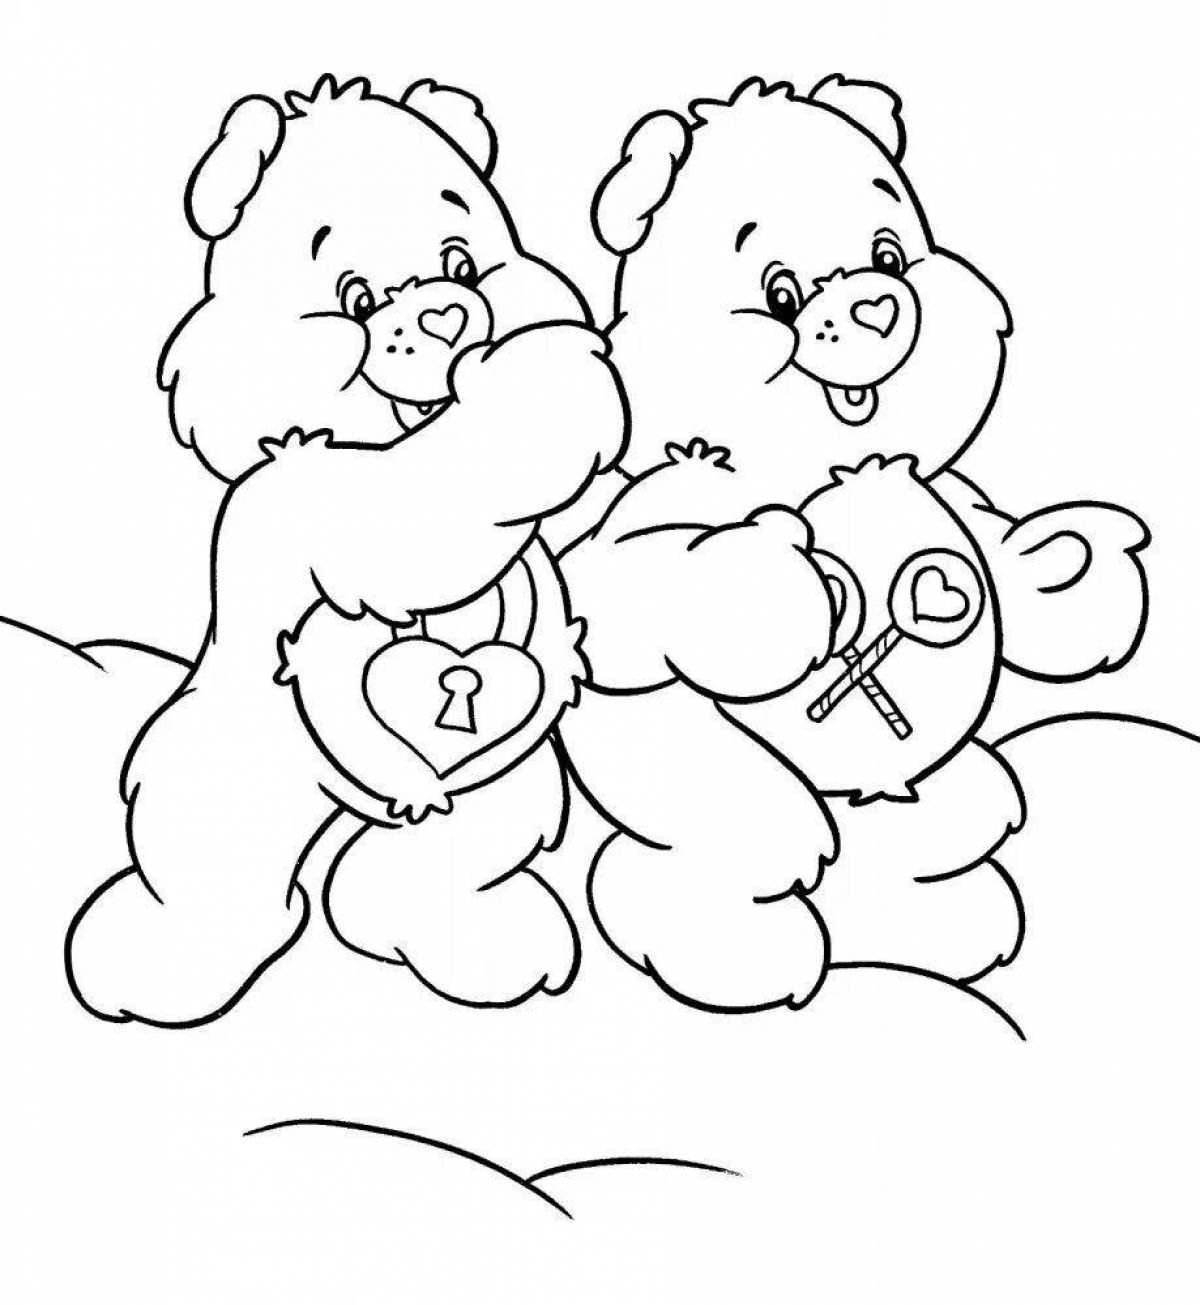 Playful coloring of two greedy teddy bears